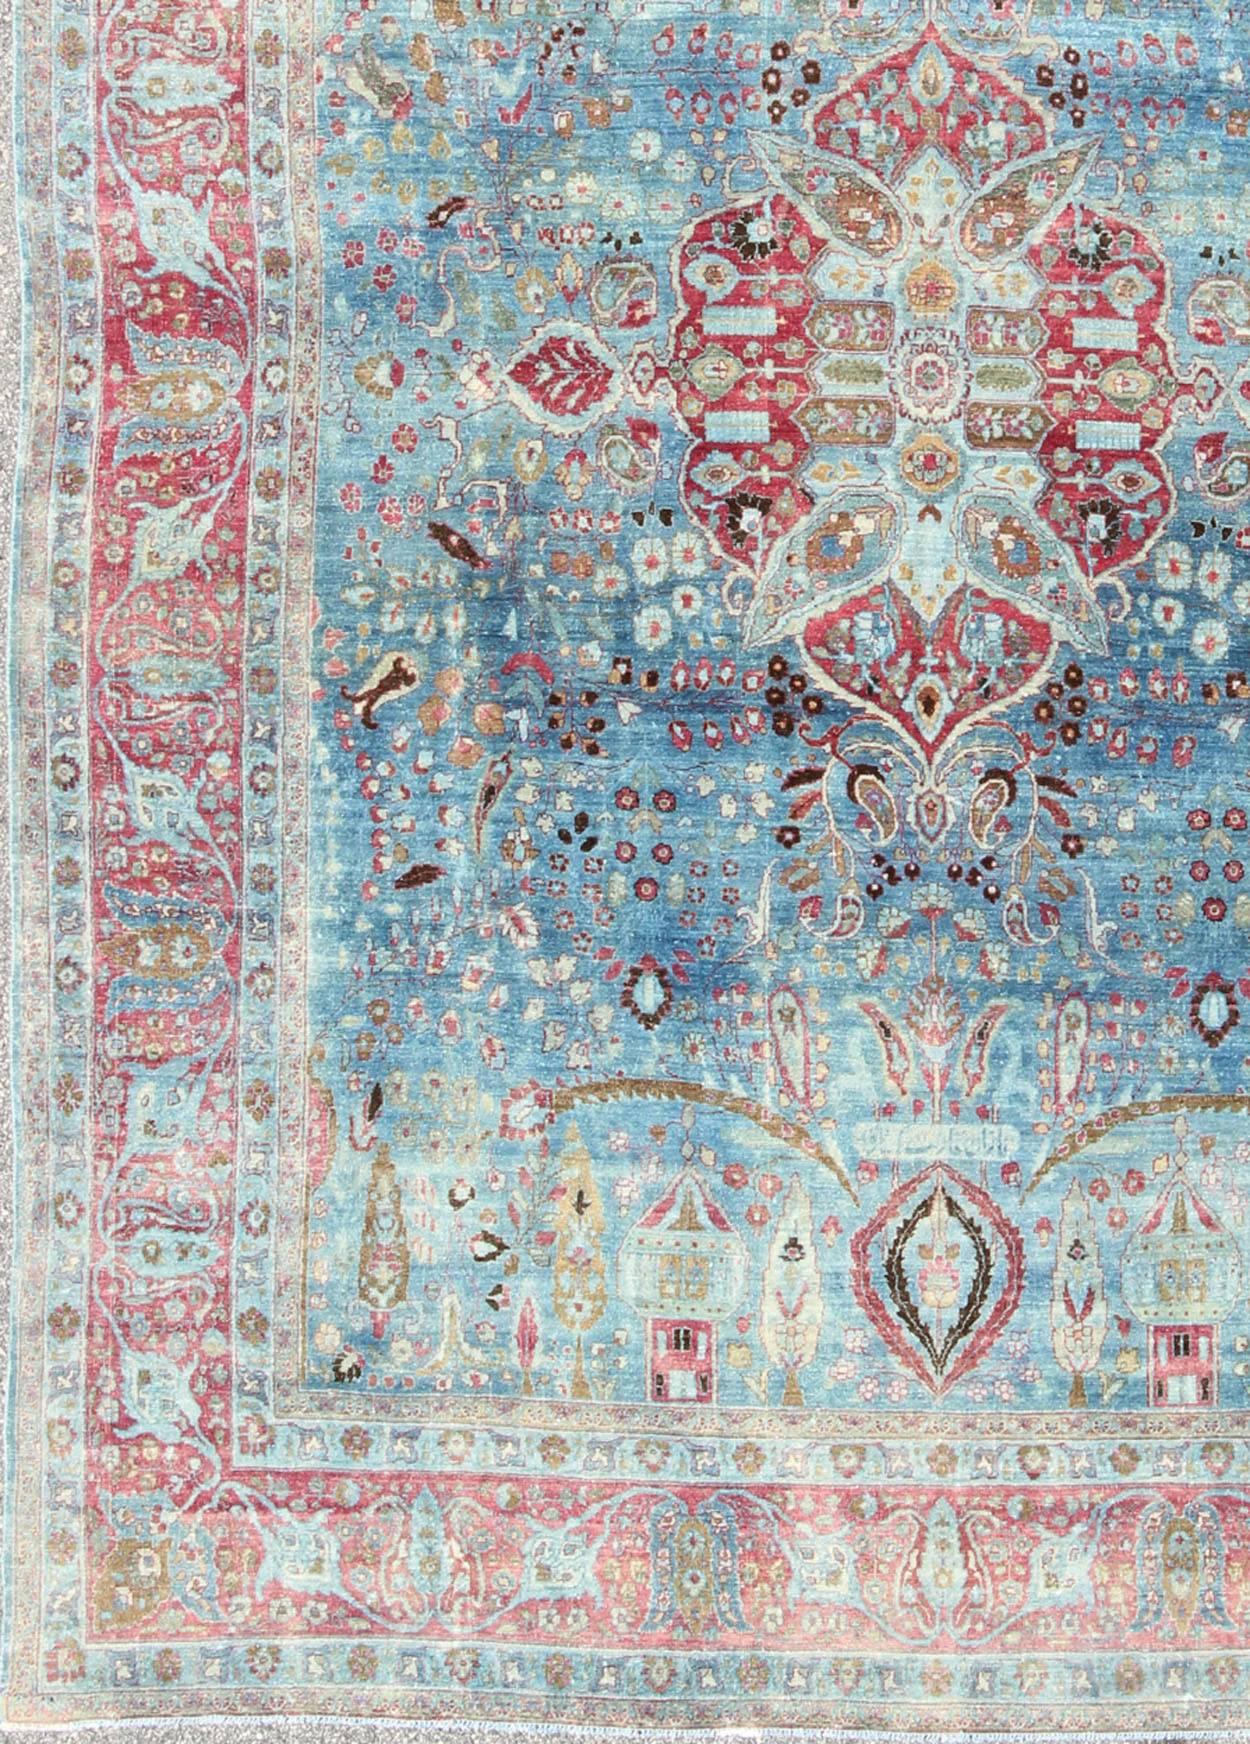 Early 20th century blue background antique Persian Khorassan rug with Medallion, rug 16-1109, country of origin / type: Iran / Khorassan, circa 1920

This spectacular antique Persian Khorasan rug (circa 1920) from early 20th century Iran bears a